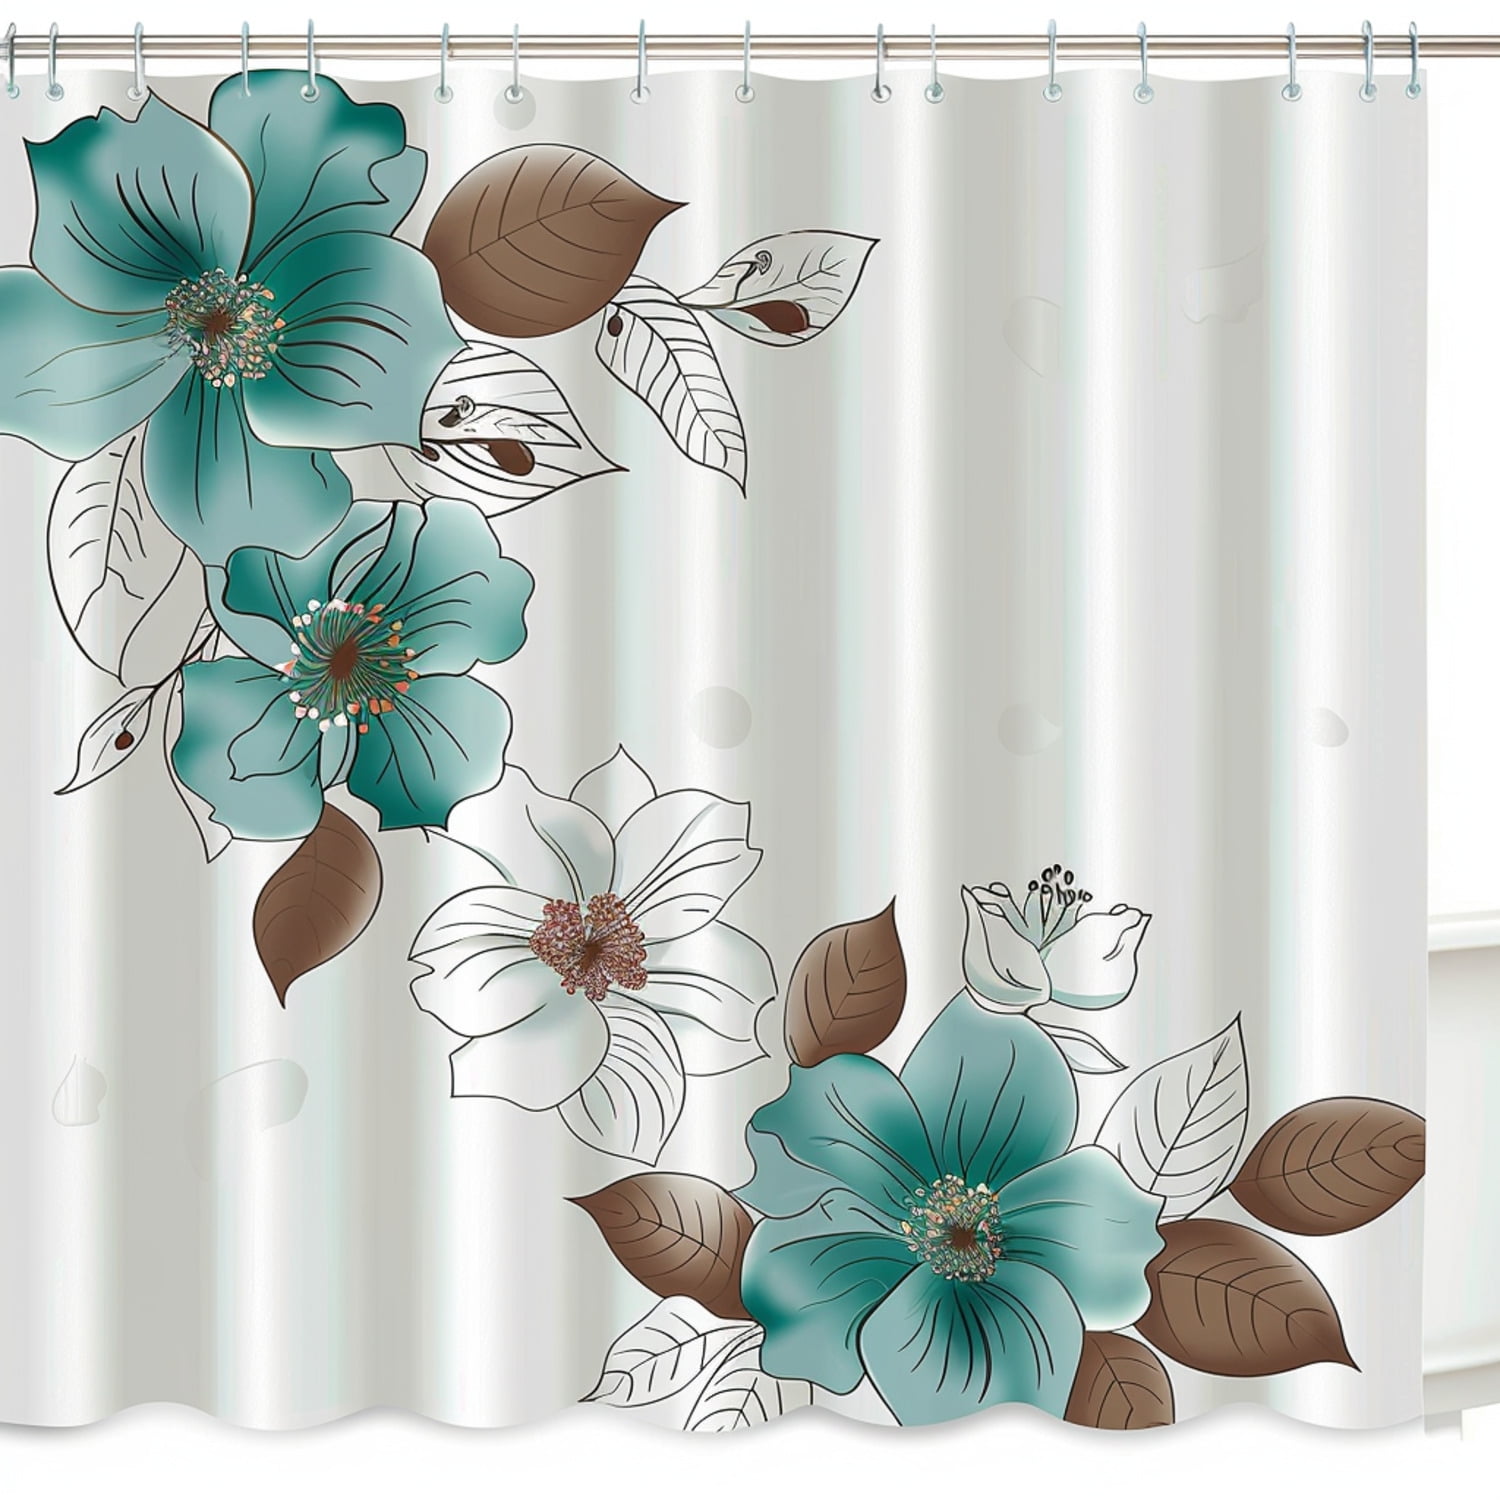 Chic Teal and White Floral Shower Curtain Elegant Bathroom Decor with ...